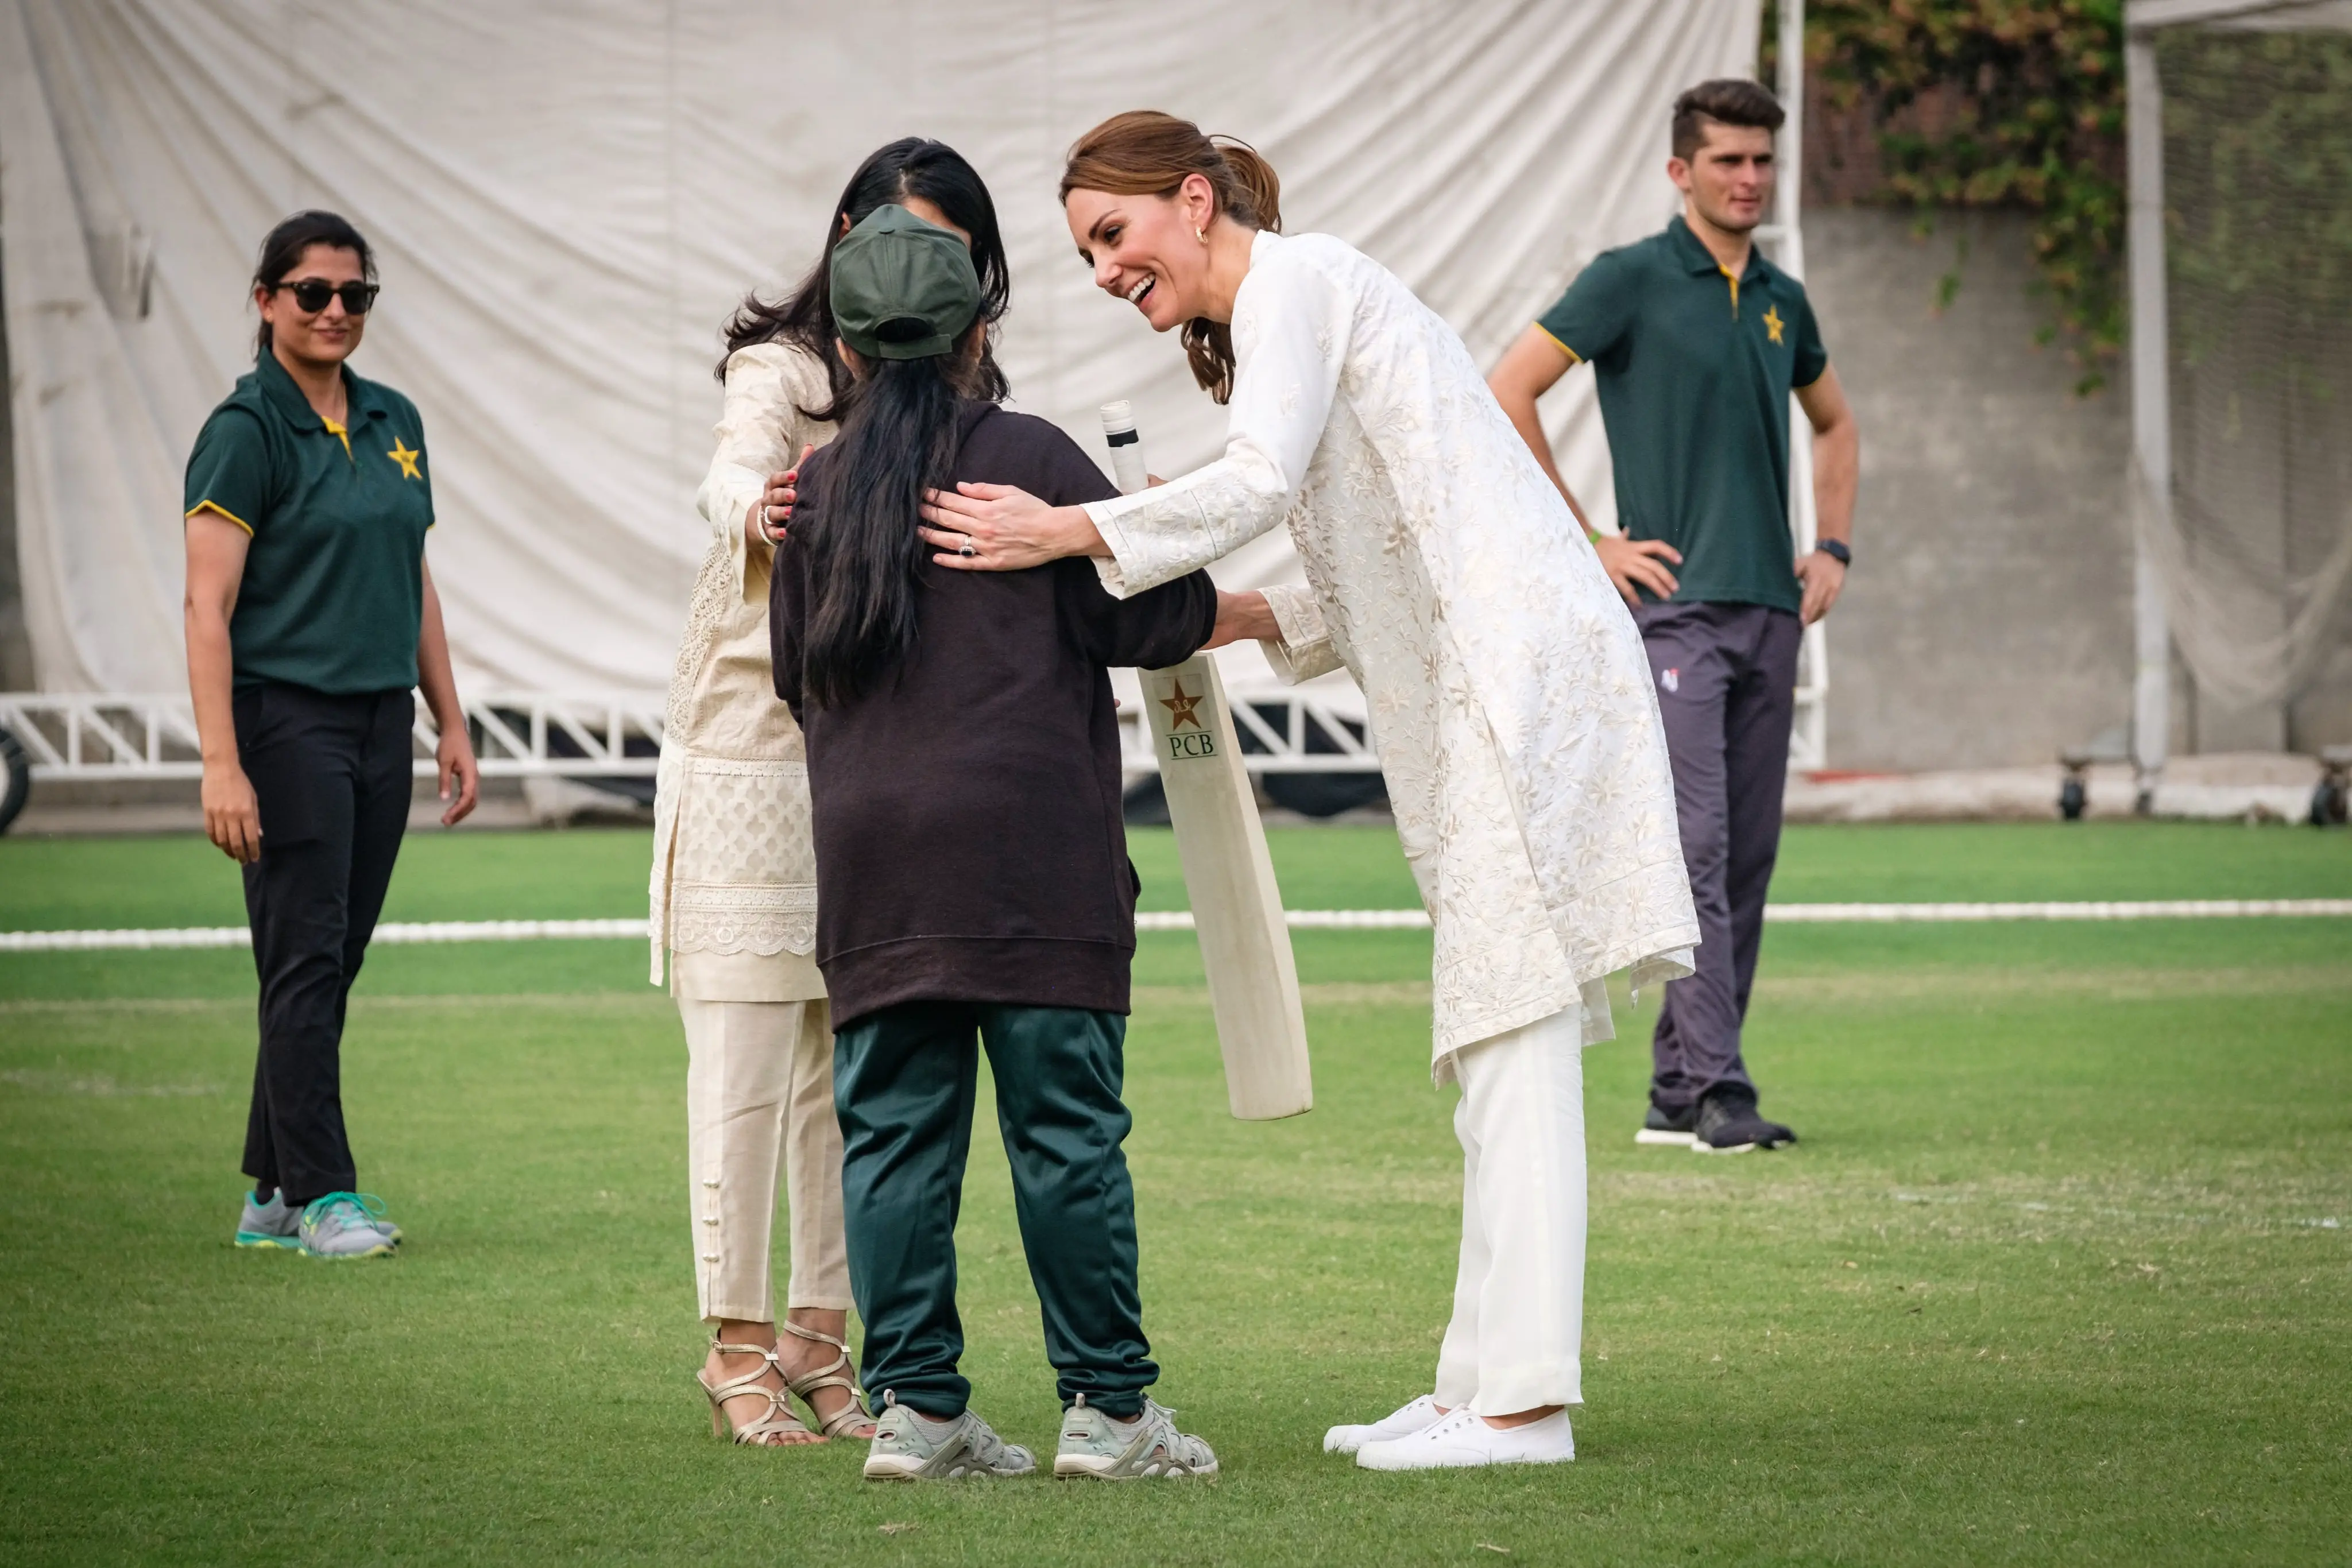 Duke and Duchess of Cambridge visited Pakistan's National Cricket Academy